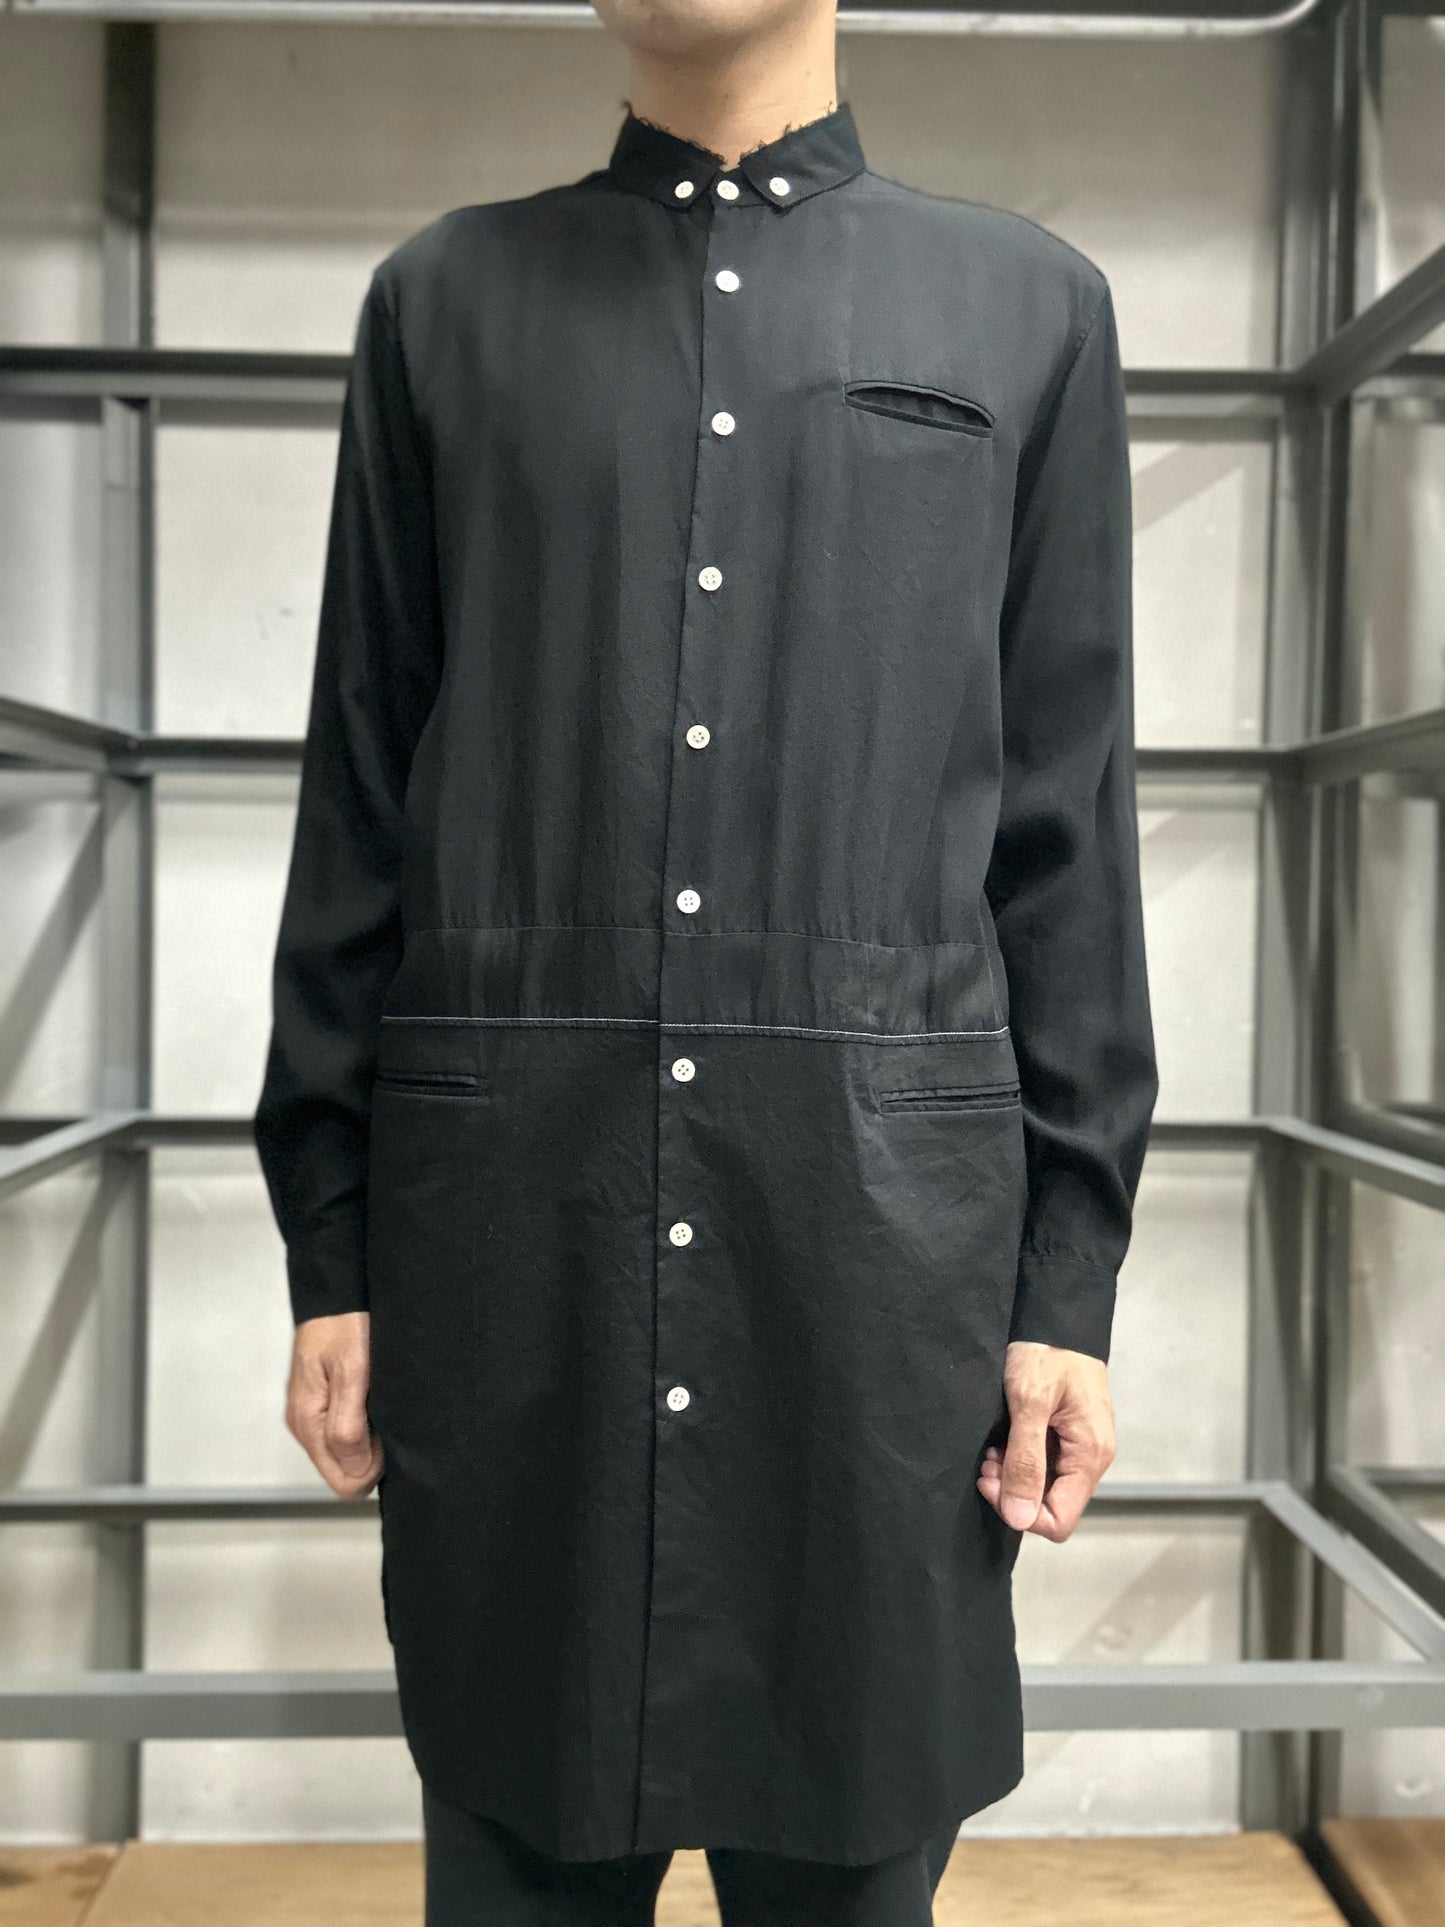 JohnUndercover SS2017 Panelled Long Shirt-Size 2